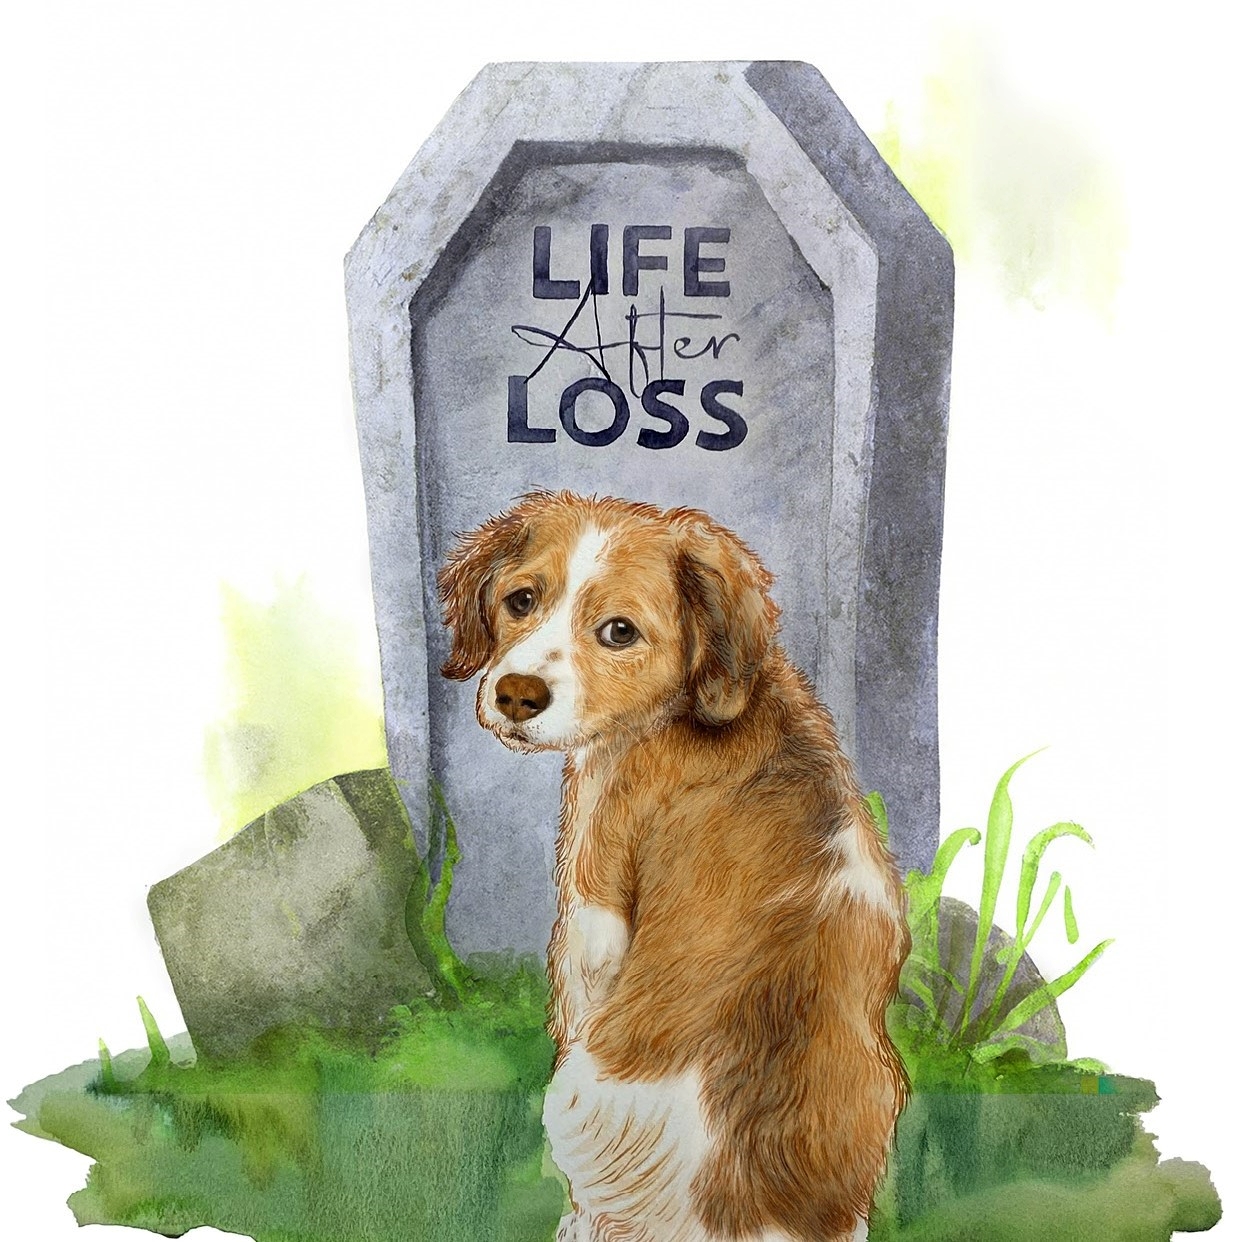 Dog sitting in front of gravestone.